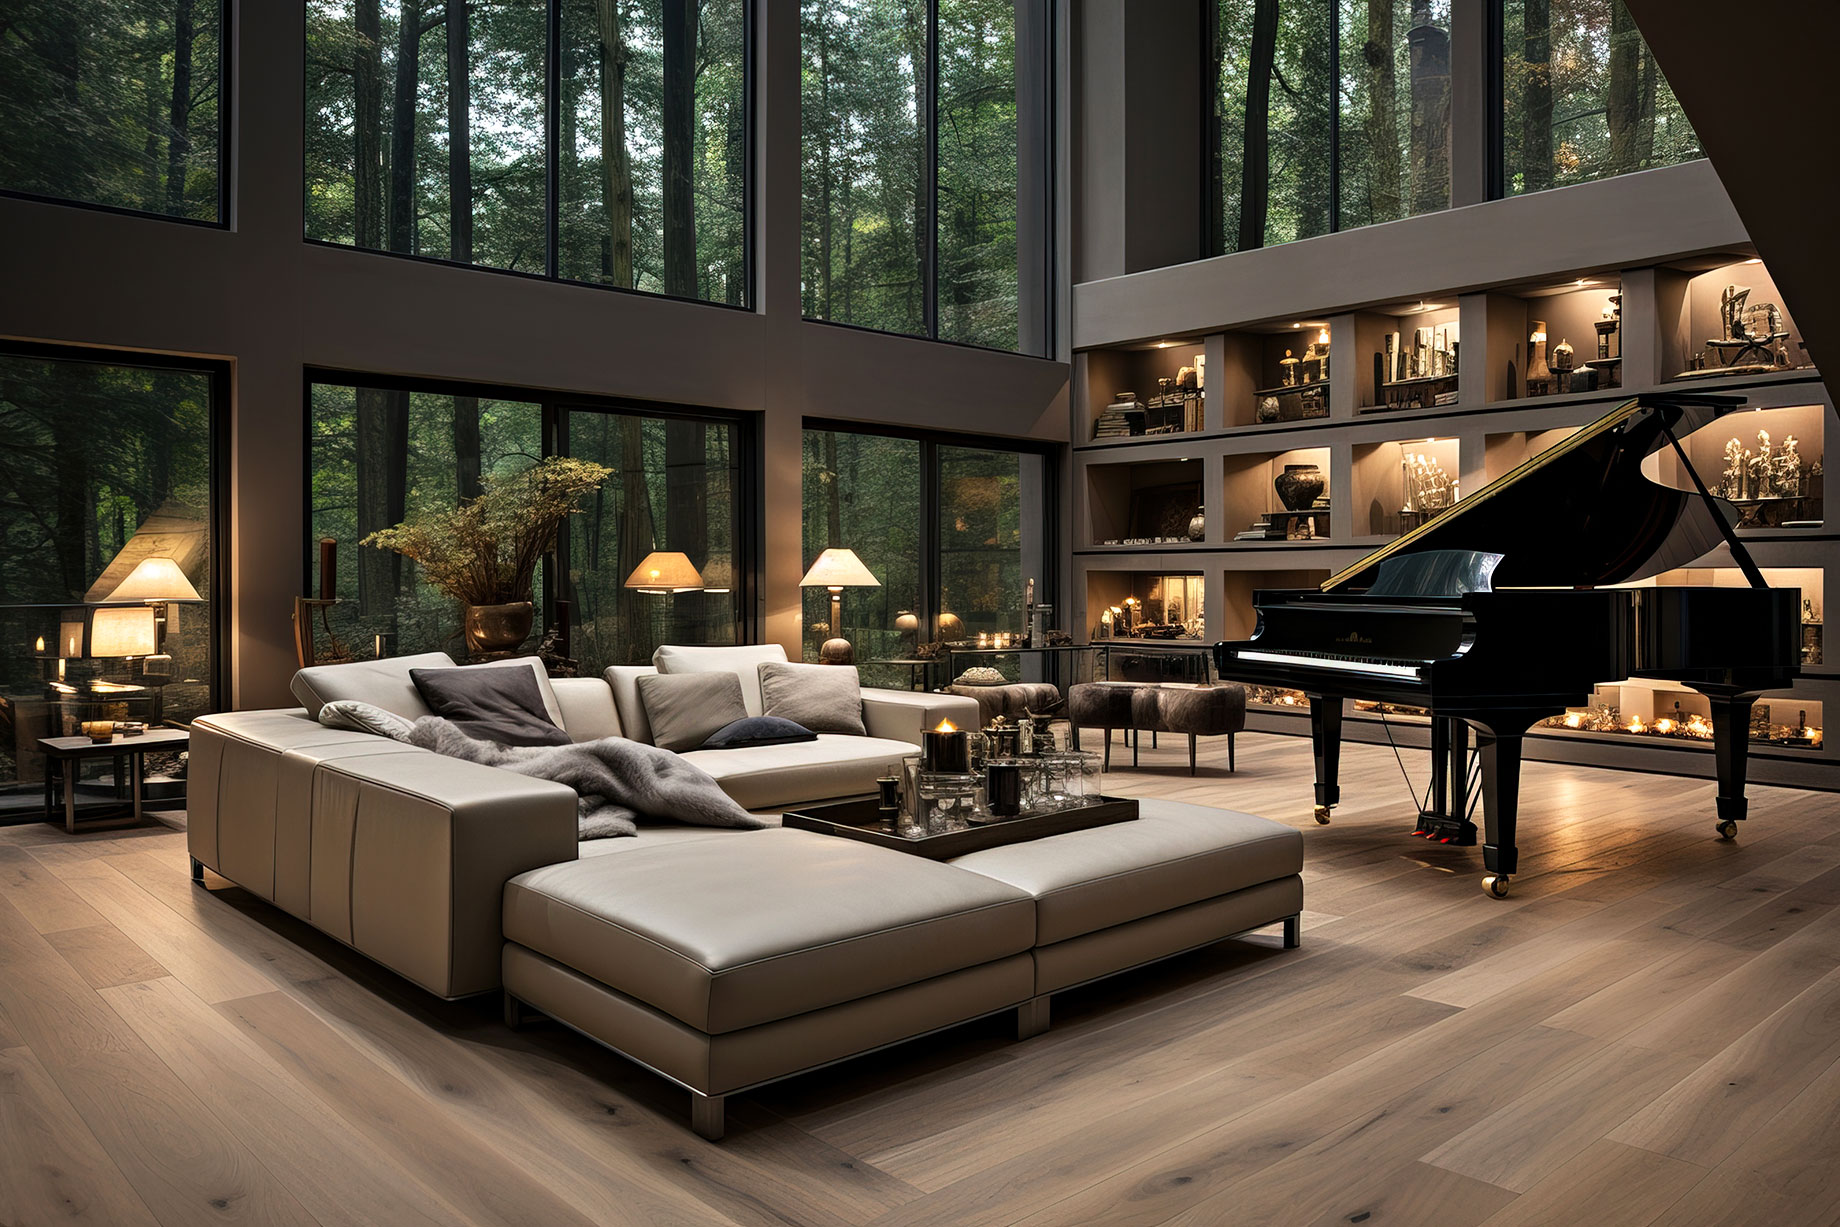 Multifunctional Spaces - Luxury Modern Living Room with a Large Sofa and Piano